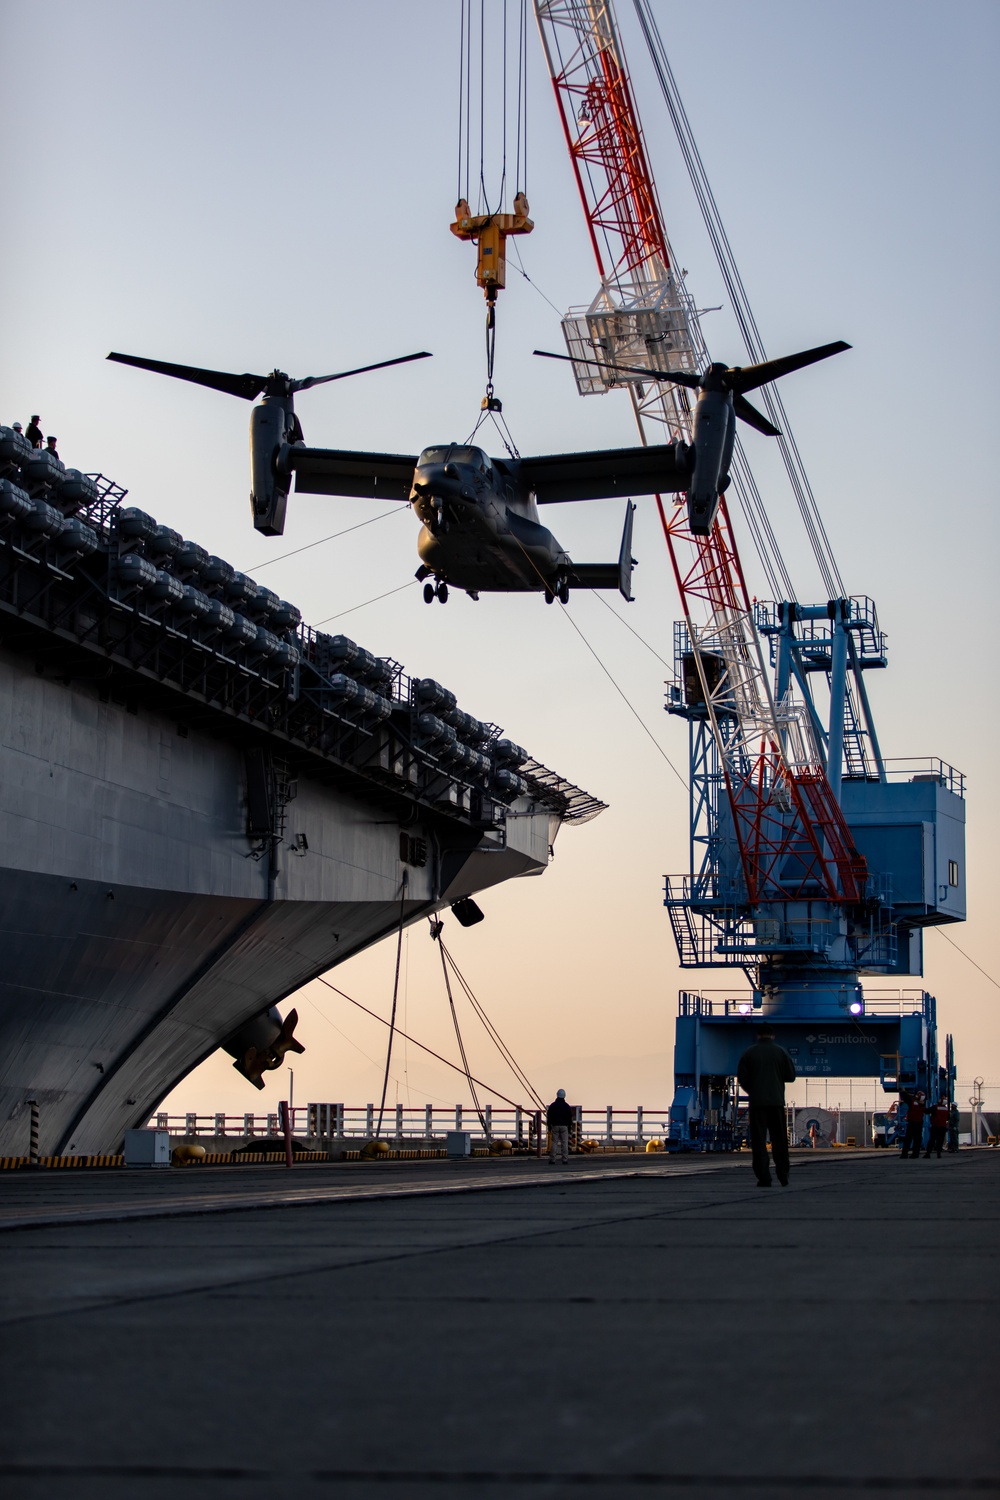 Cradle in the Sky: Marines and U.S. Air Force conduct CV-22 Osprey logistic operations